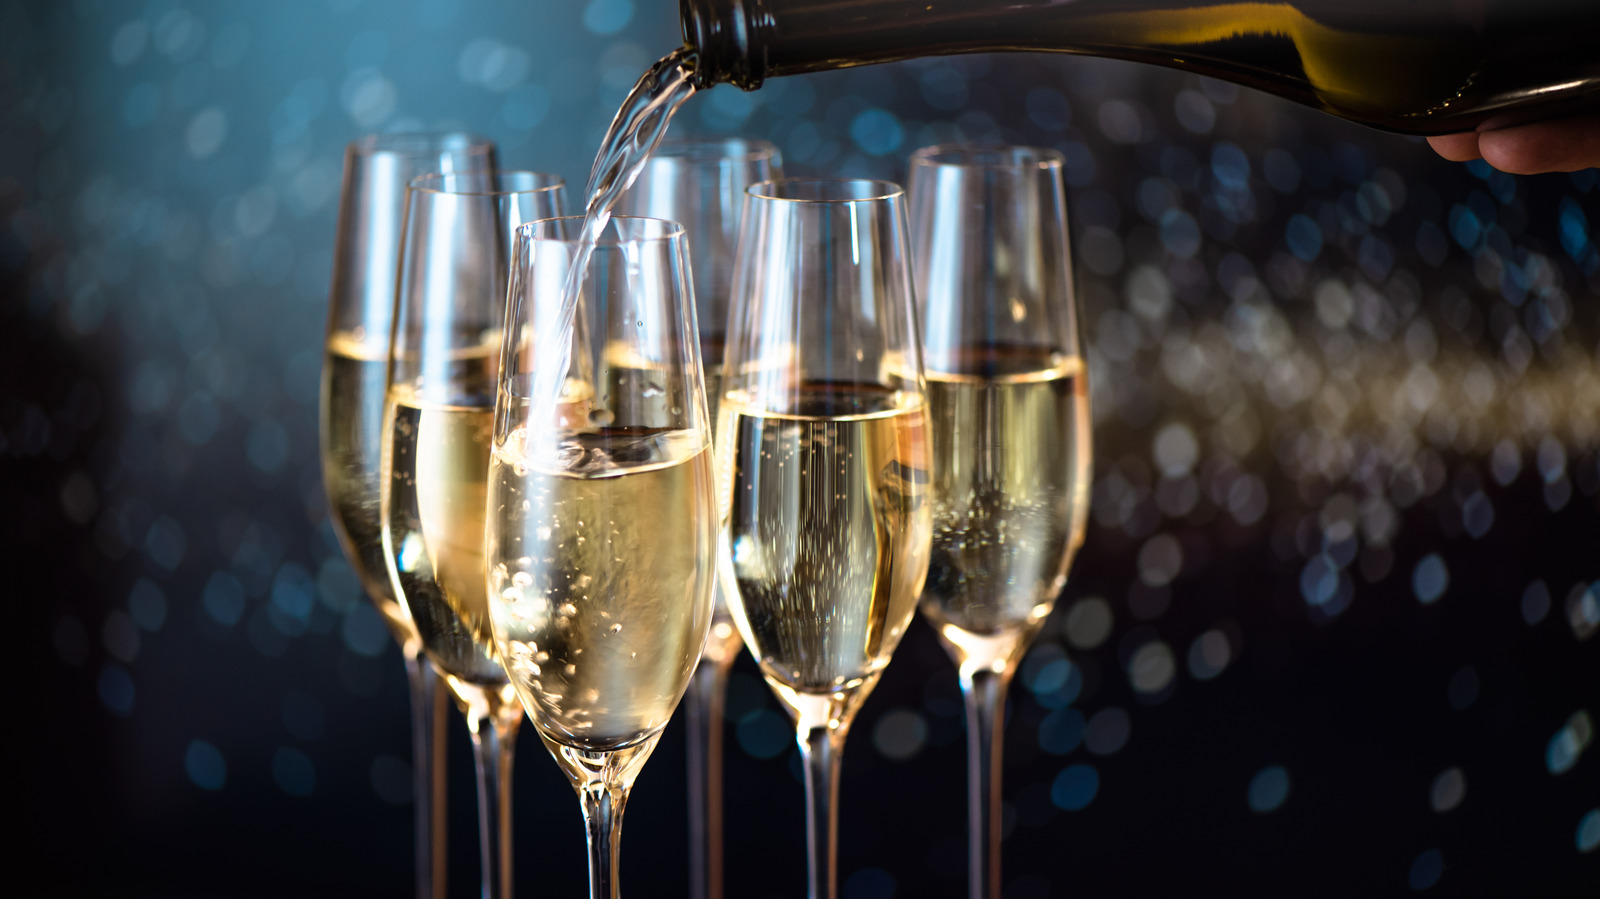 DEAL OF THE DAY:  slashes £13 off champagne, Prosecco and more for  New Year's Eve